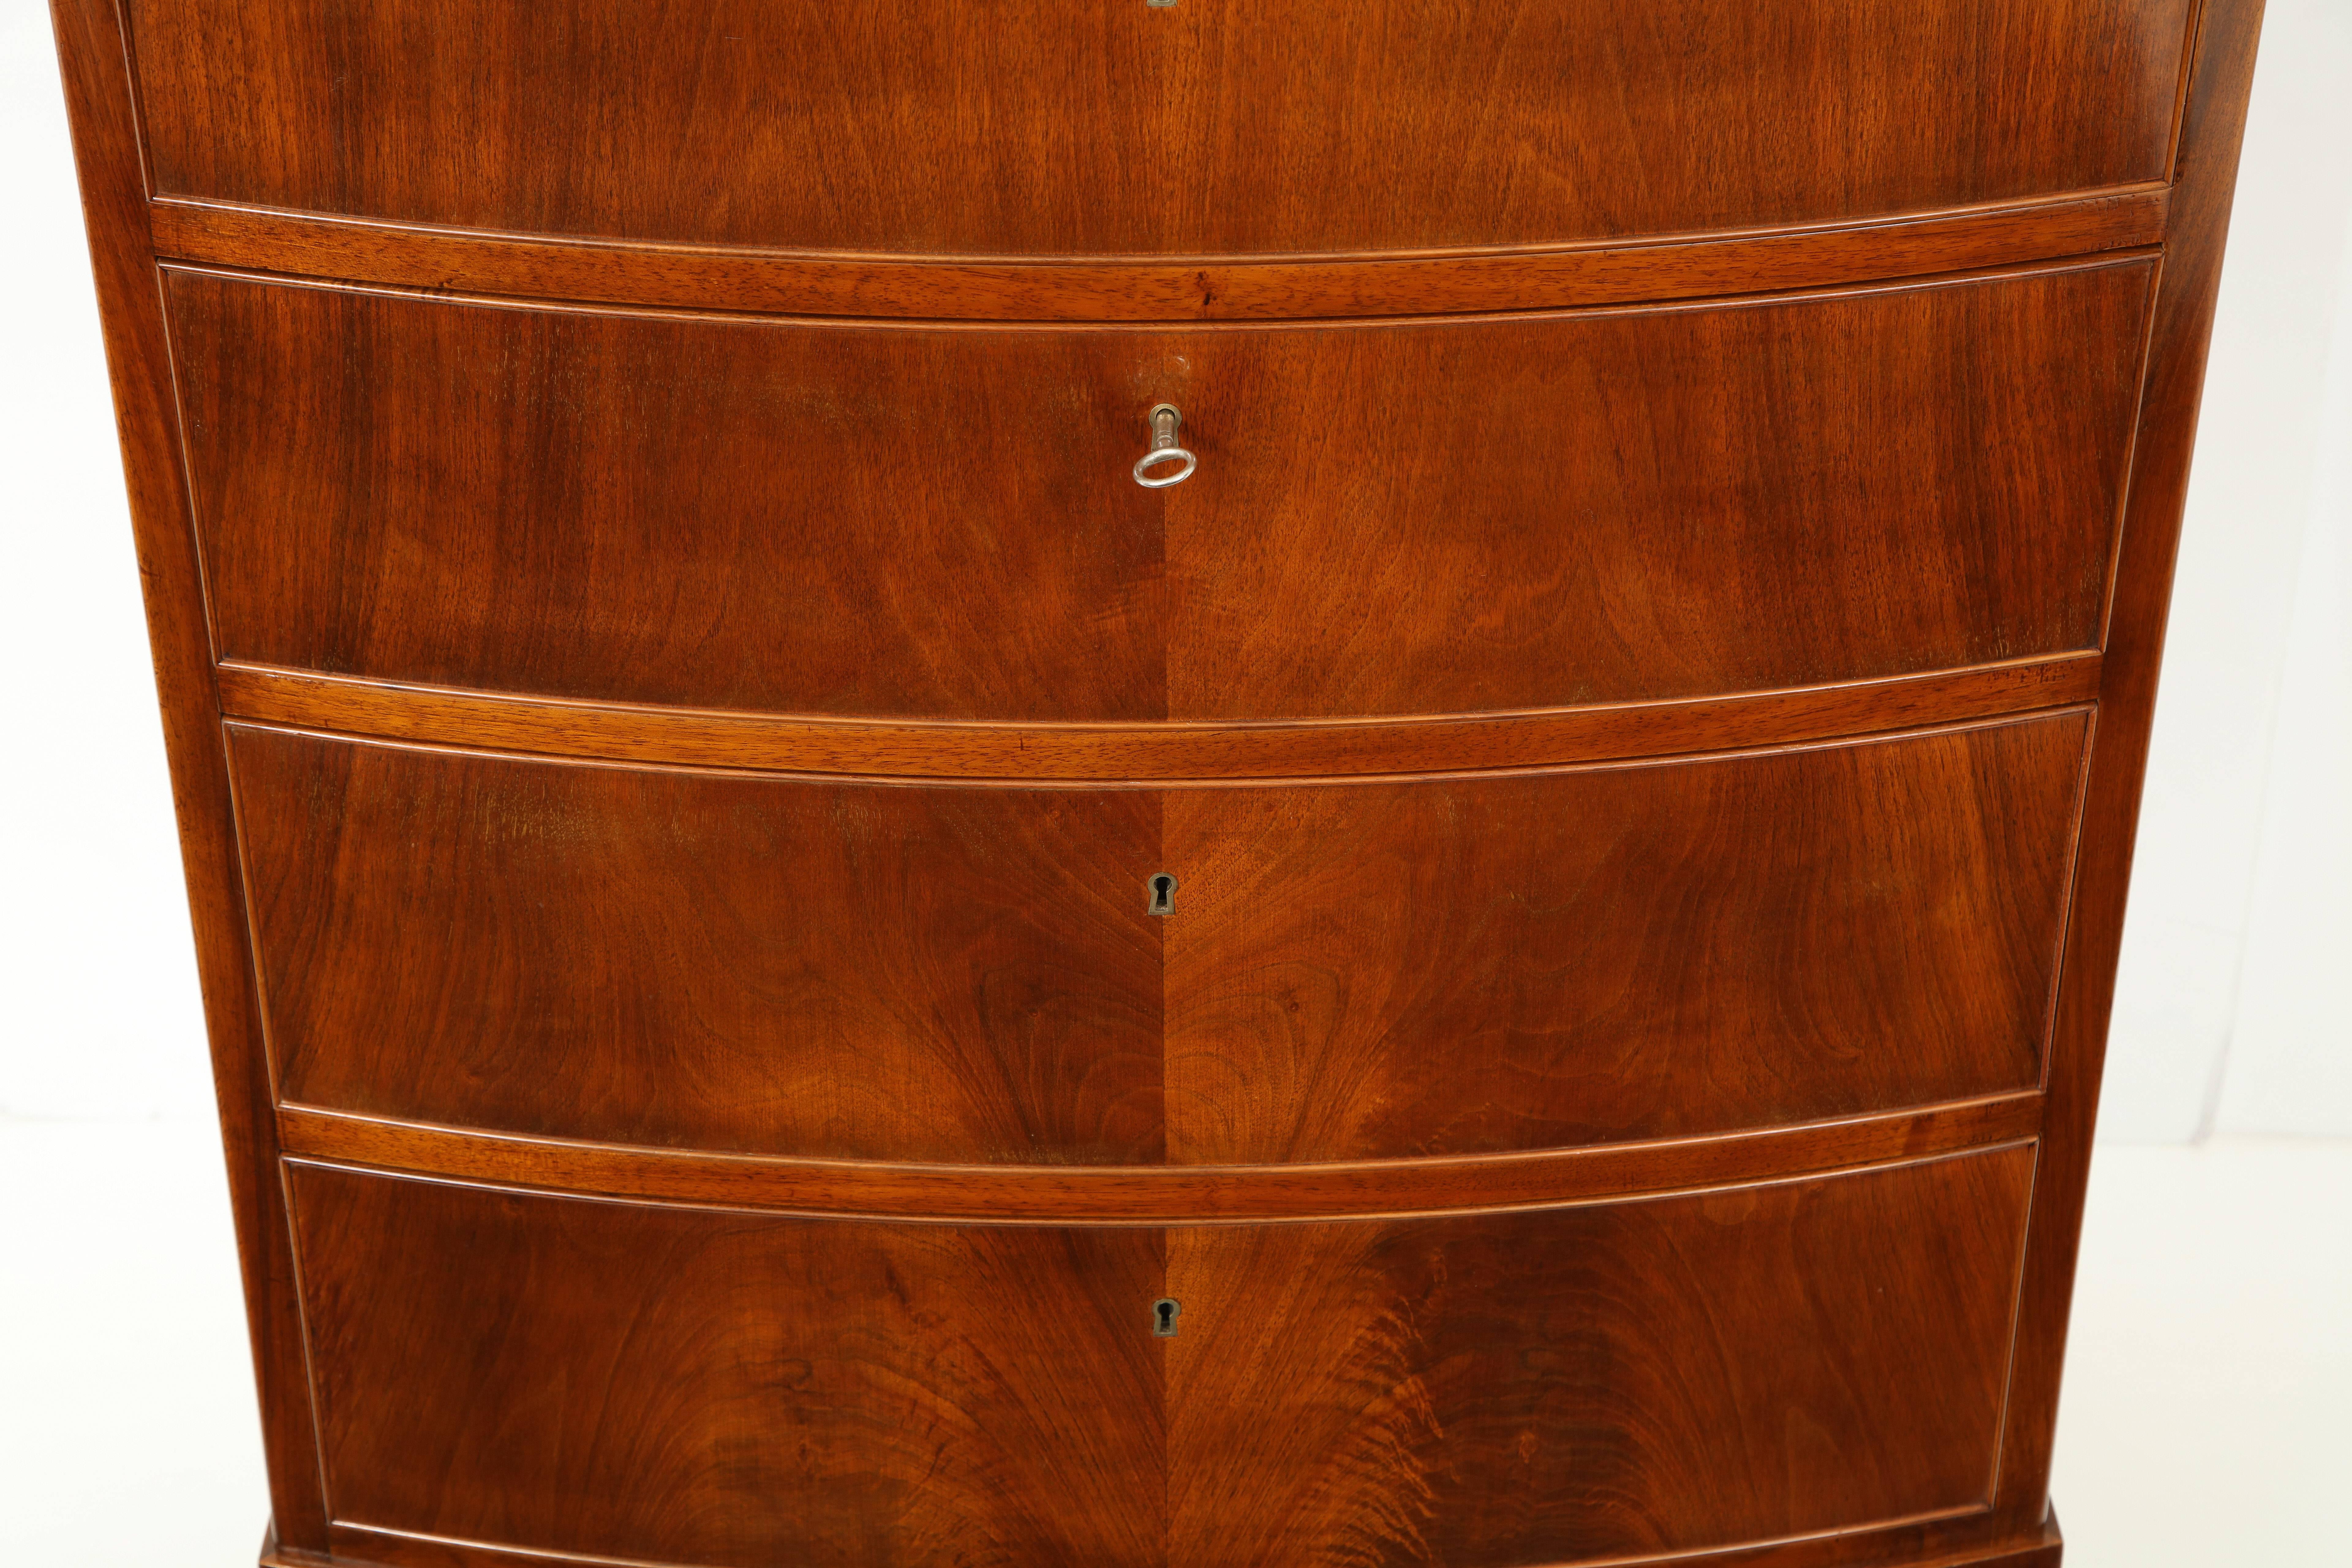 An elegant Frits Henningsen figured mahogany chest of drawers, circa 1940s, with six bow-fronted graduated drawers raised on square tapered legs with block feet. An excellent example of the understated cabinetmaking skills of the Danish designer and